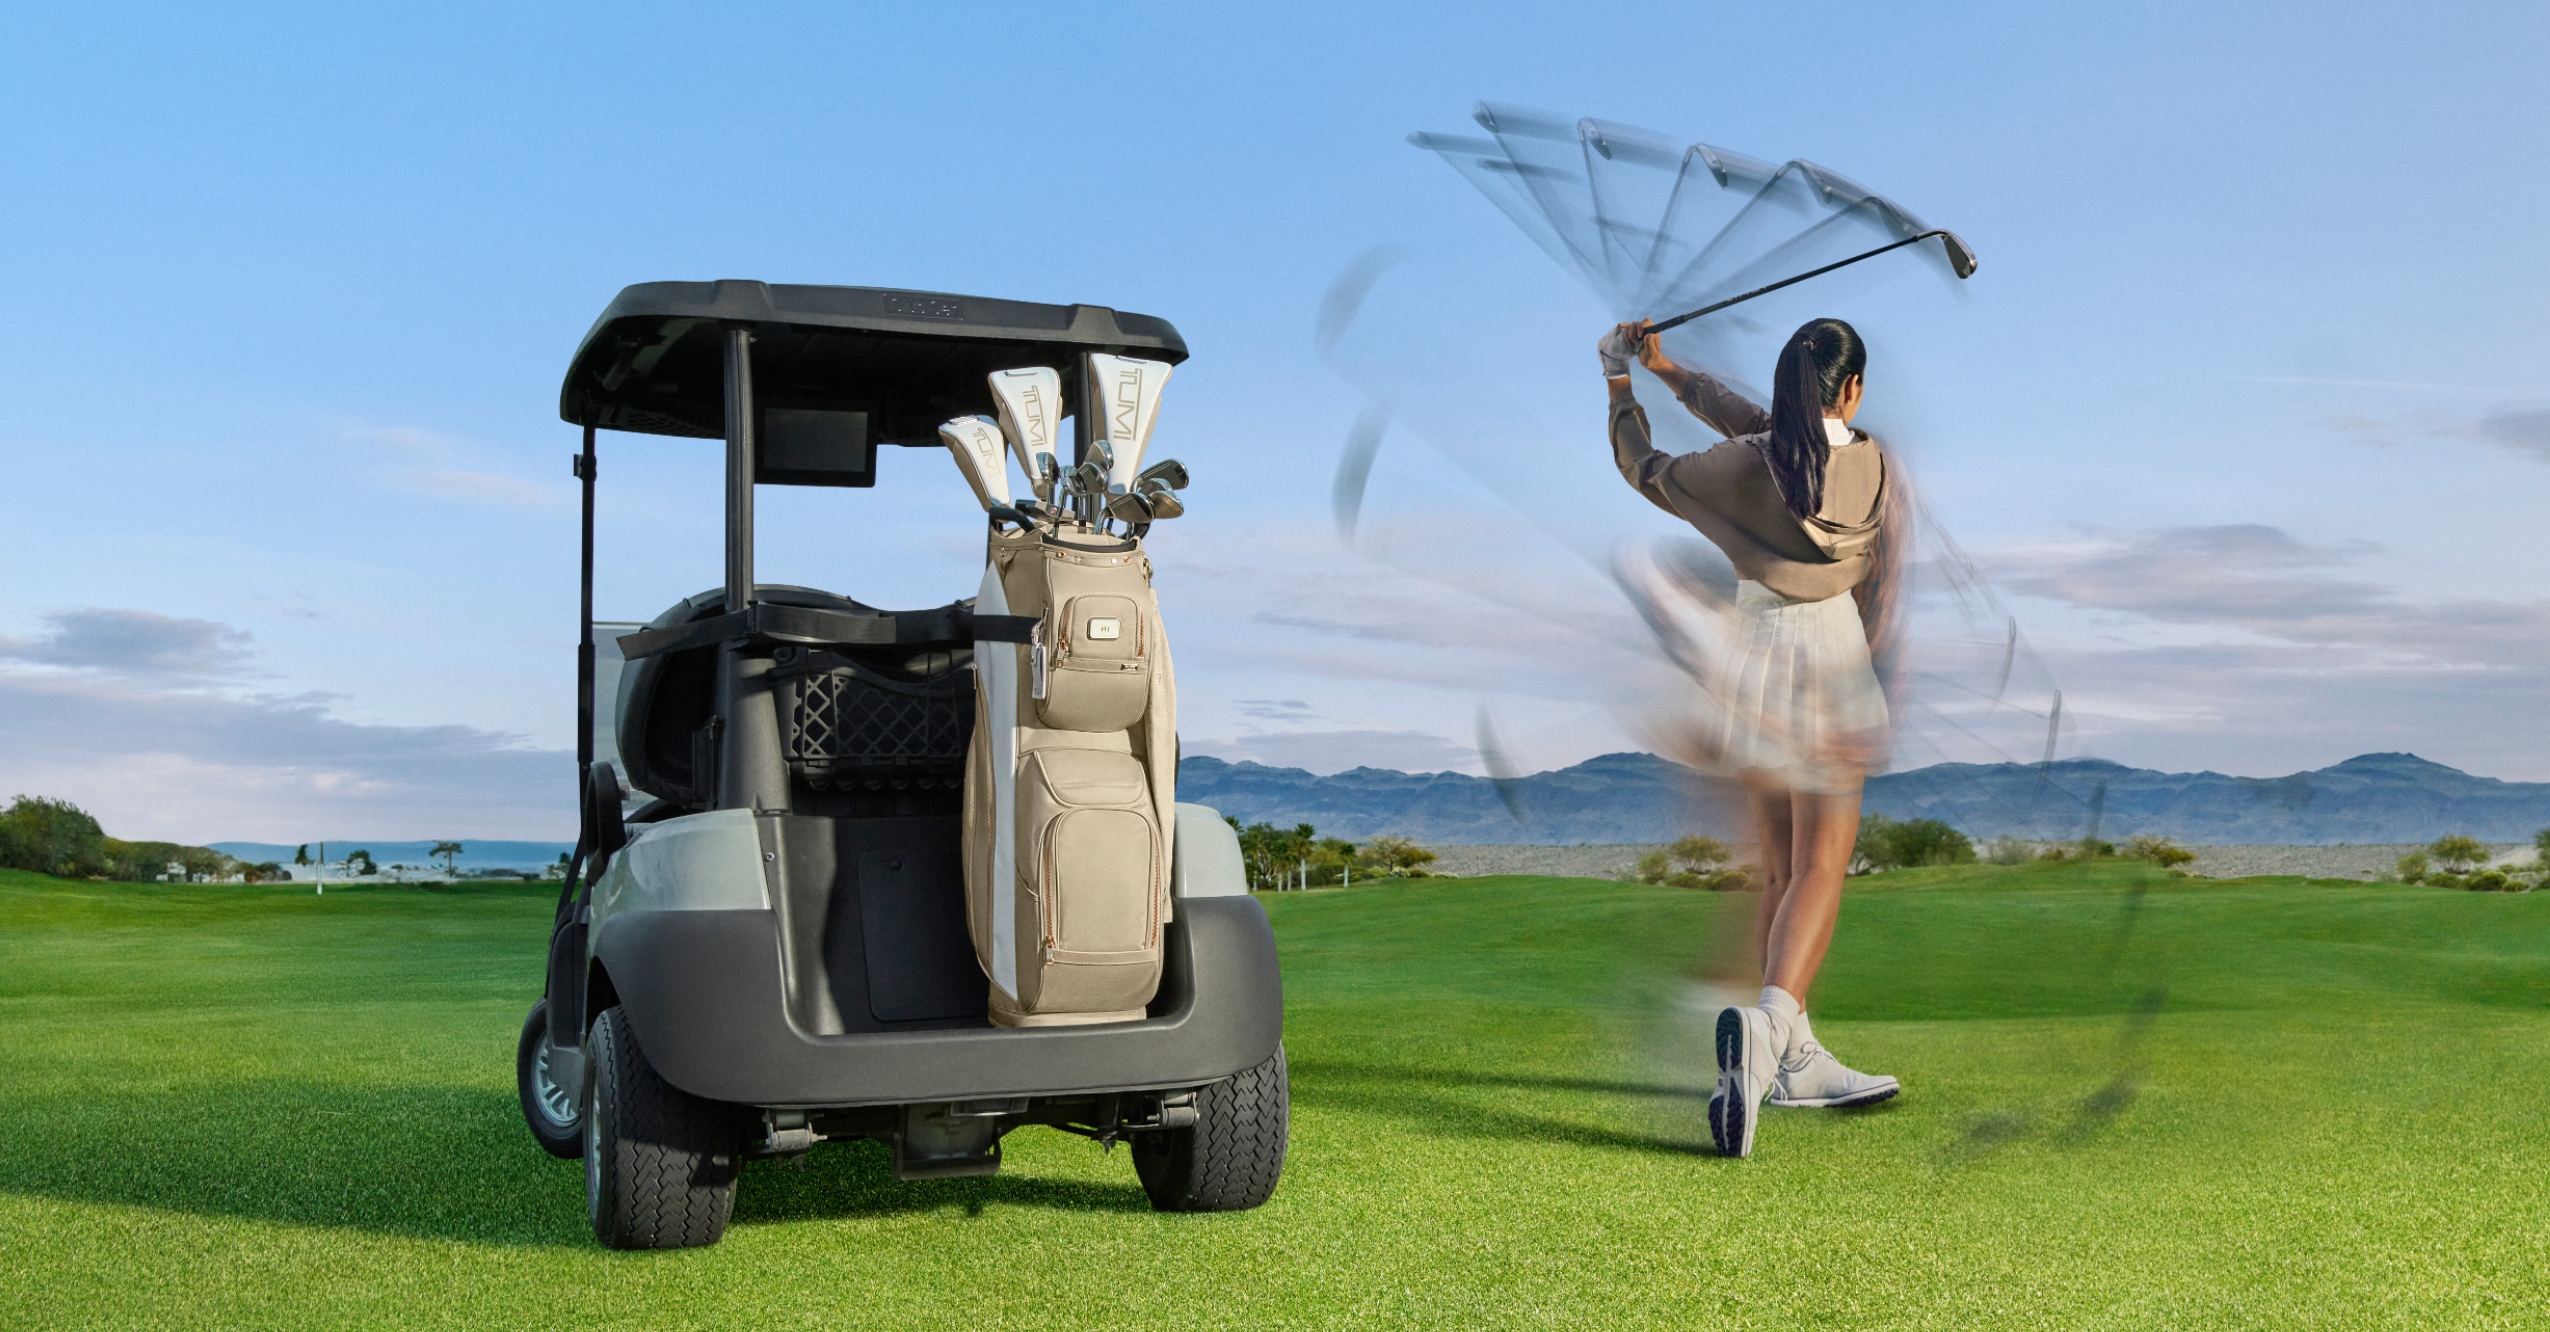 Tumi Golf Promo Tumi Tees Up First-Ever Golf Collection